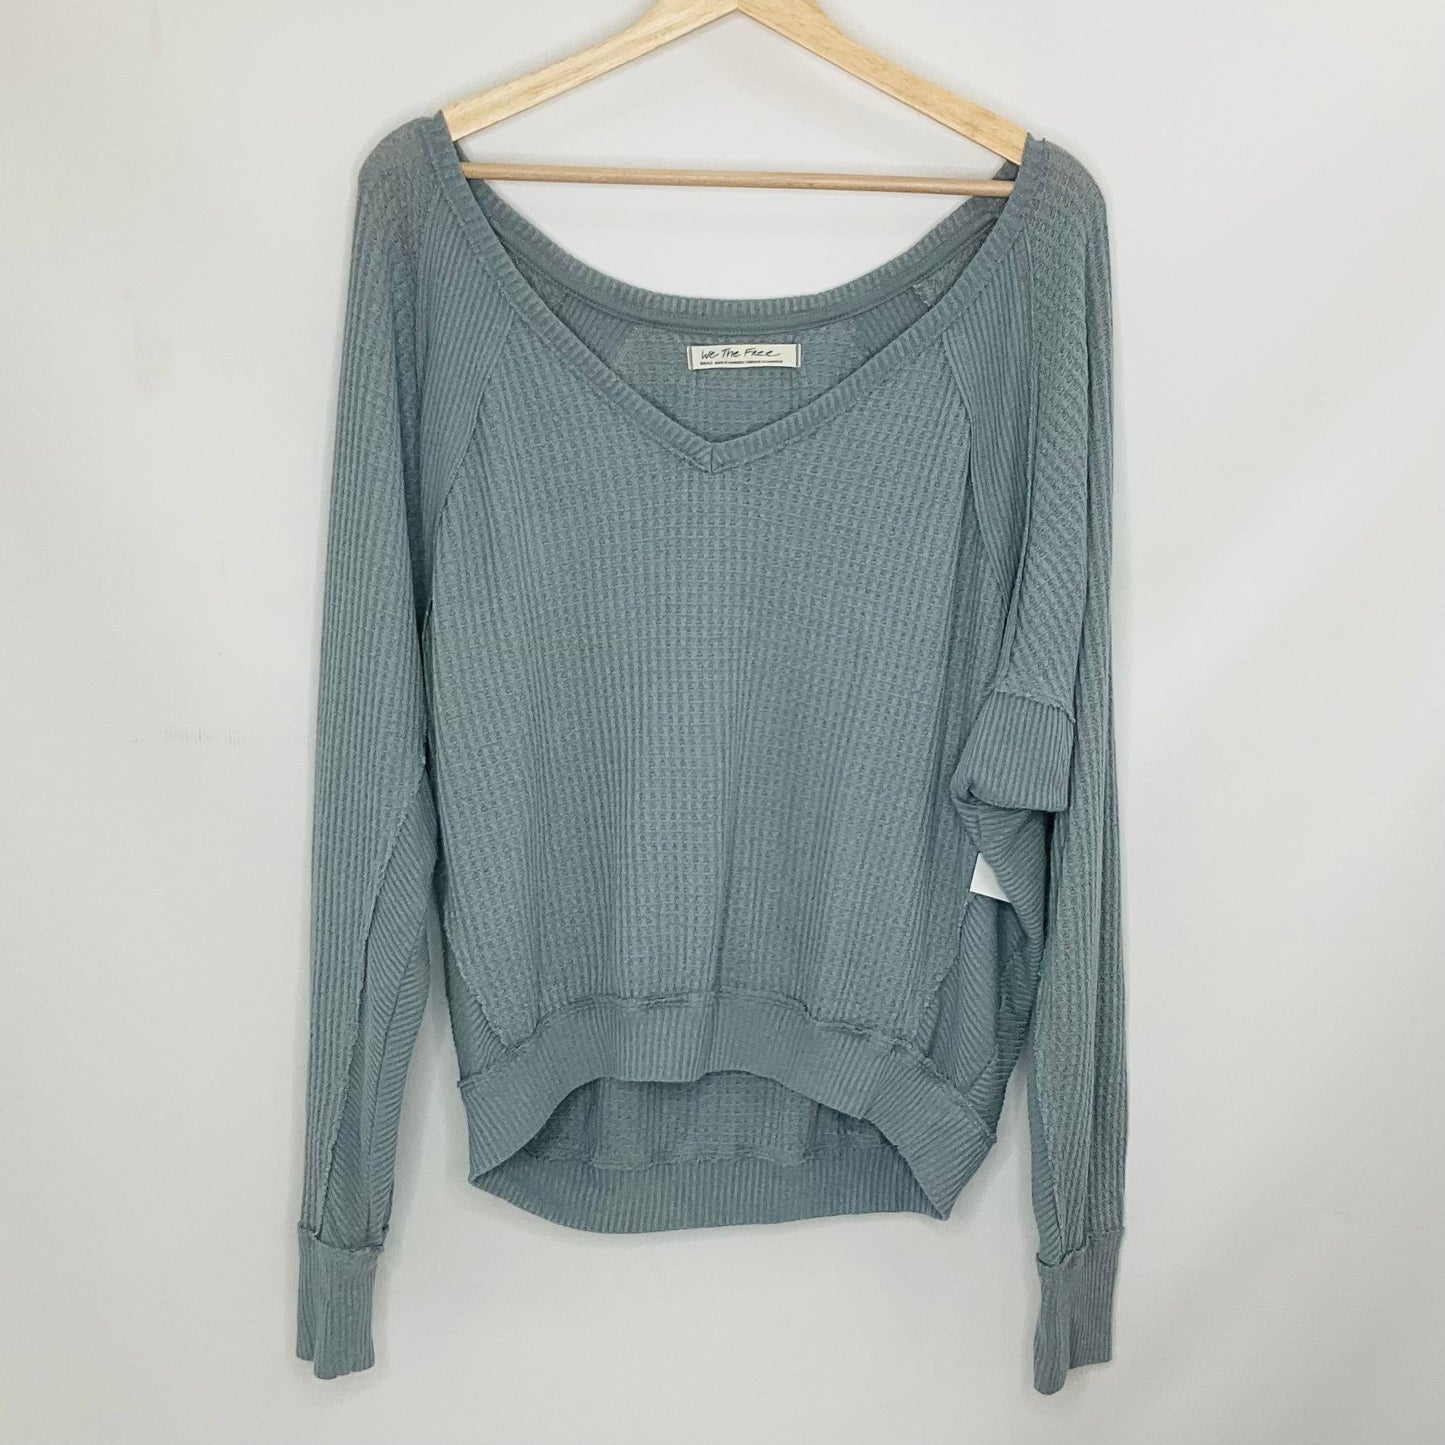 Grey Top Long Sleeve We The Free, Size S